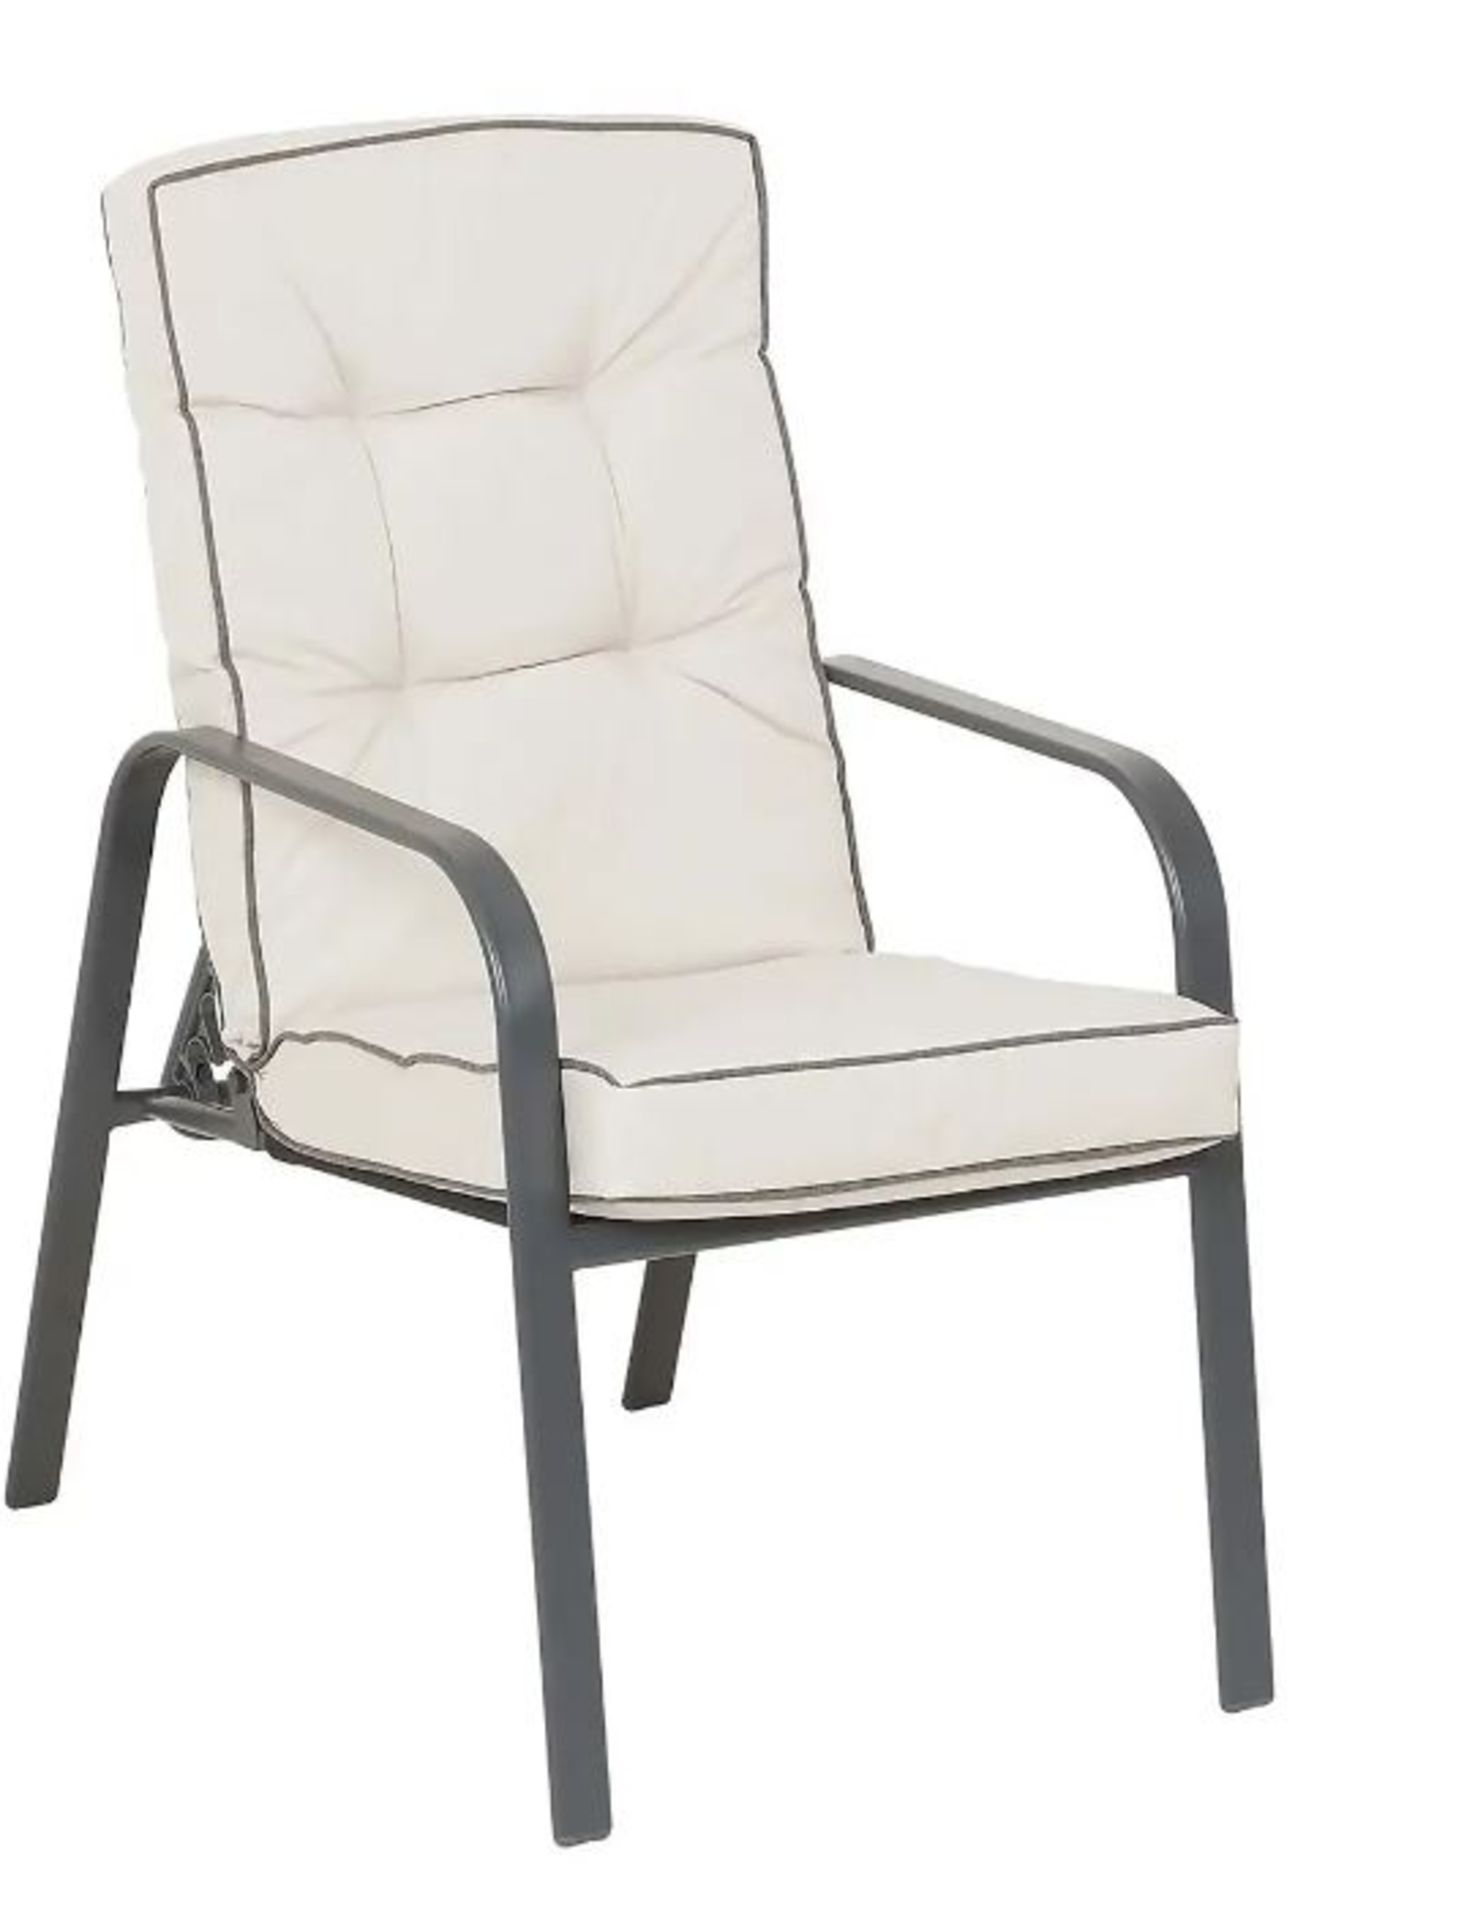 (2O) 6x Rowly Reclining Garden Chair With 6x Cushions RRP £70 Each. - Image 2 of 6